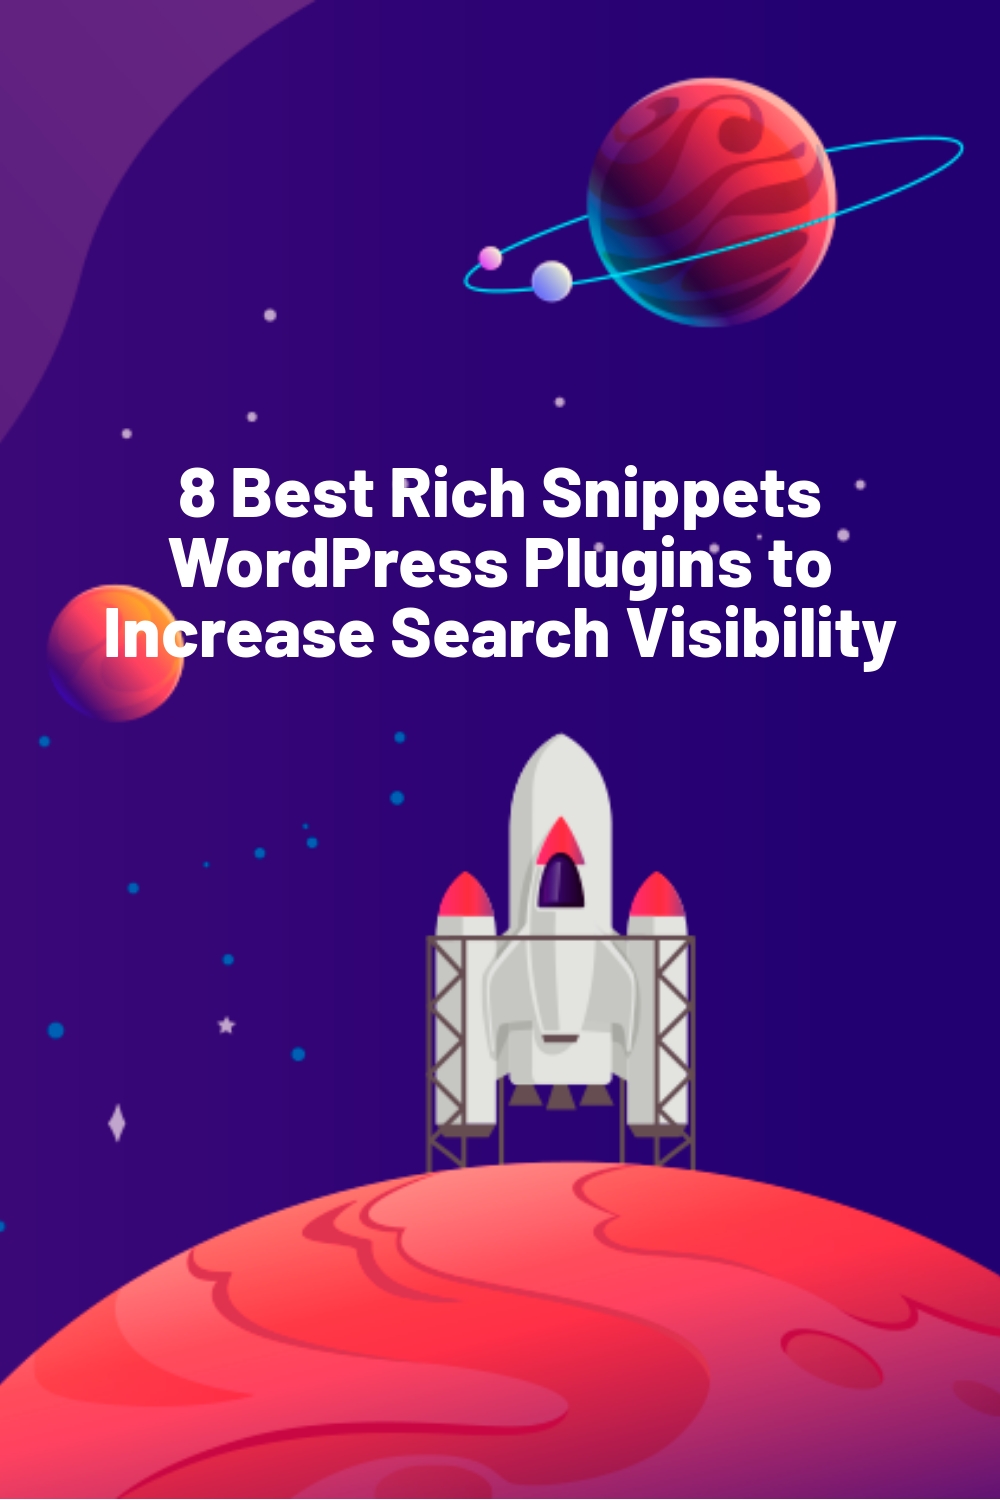 8 Best Rich Snippets WordPress Plugins to Increase Search Visibility